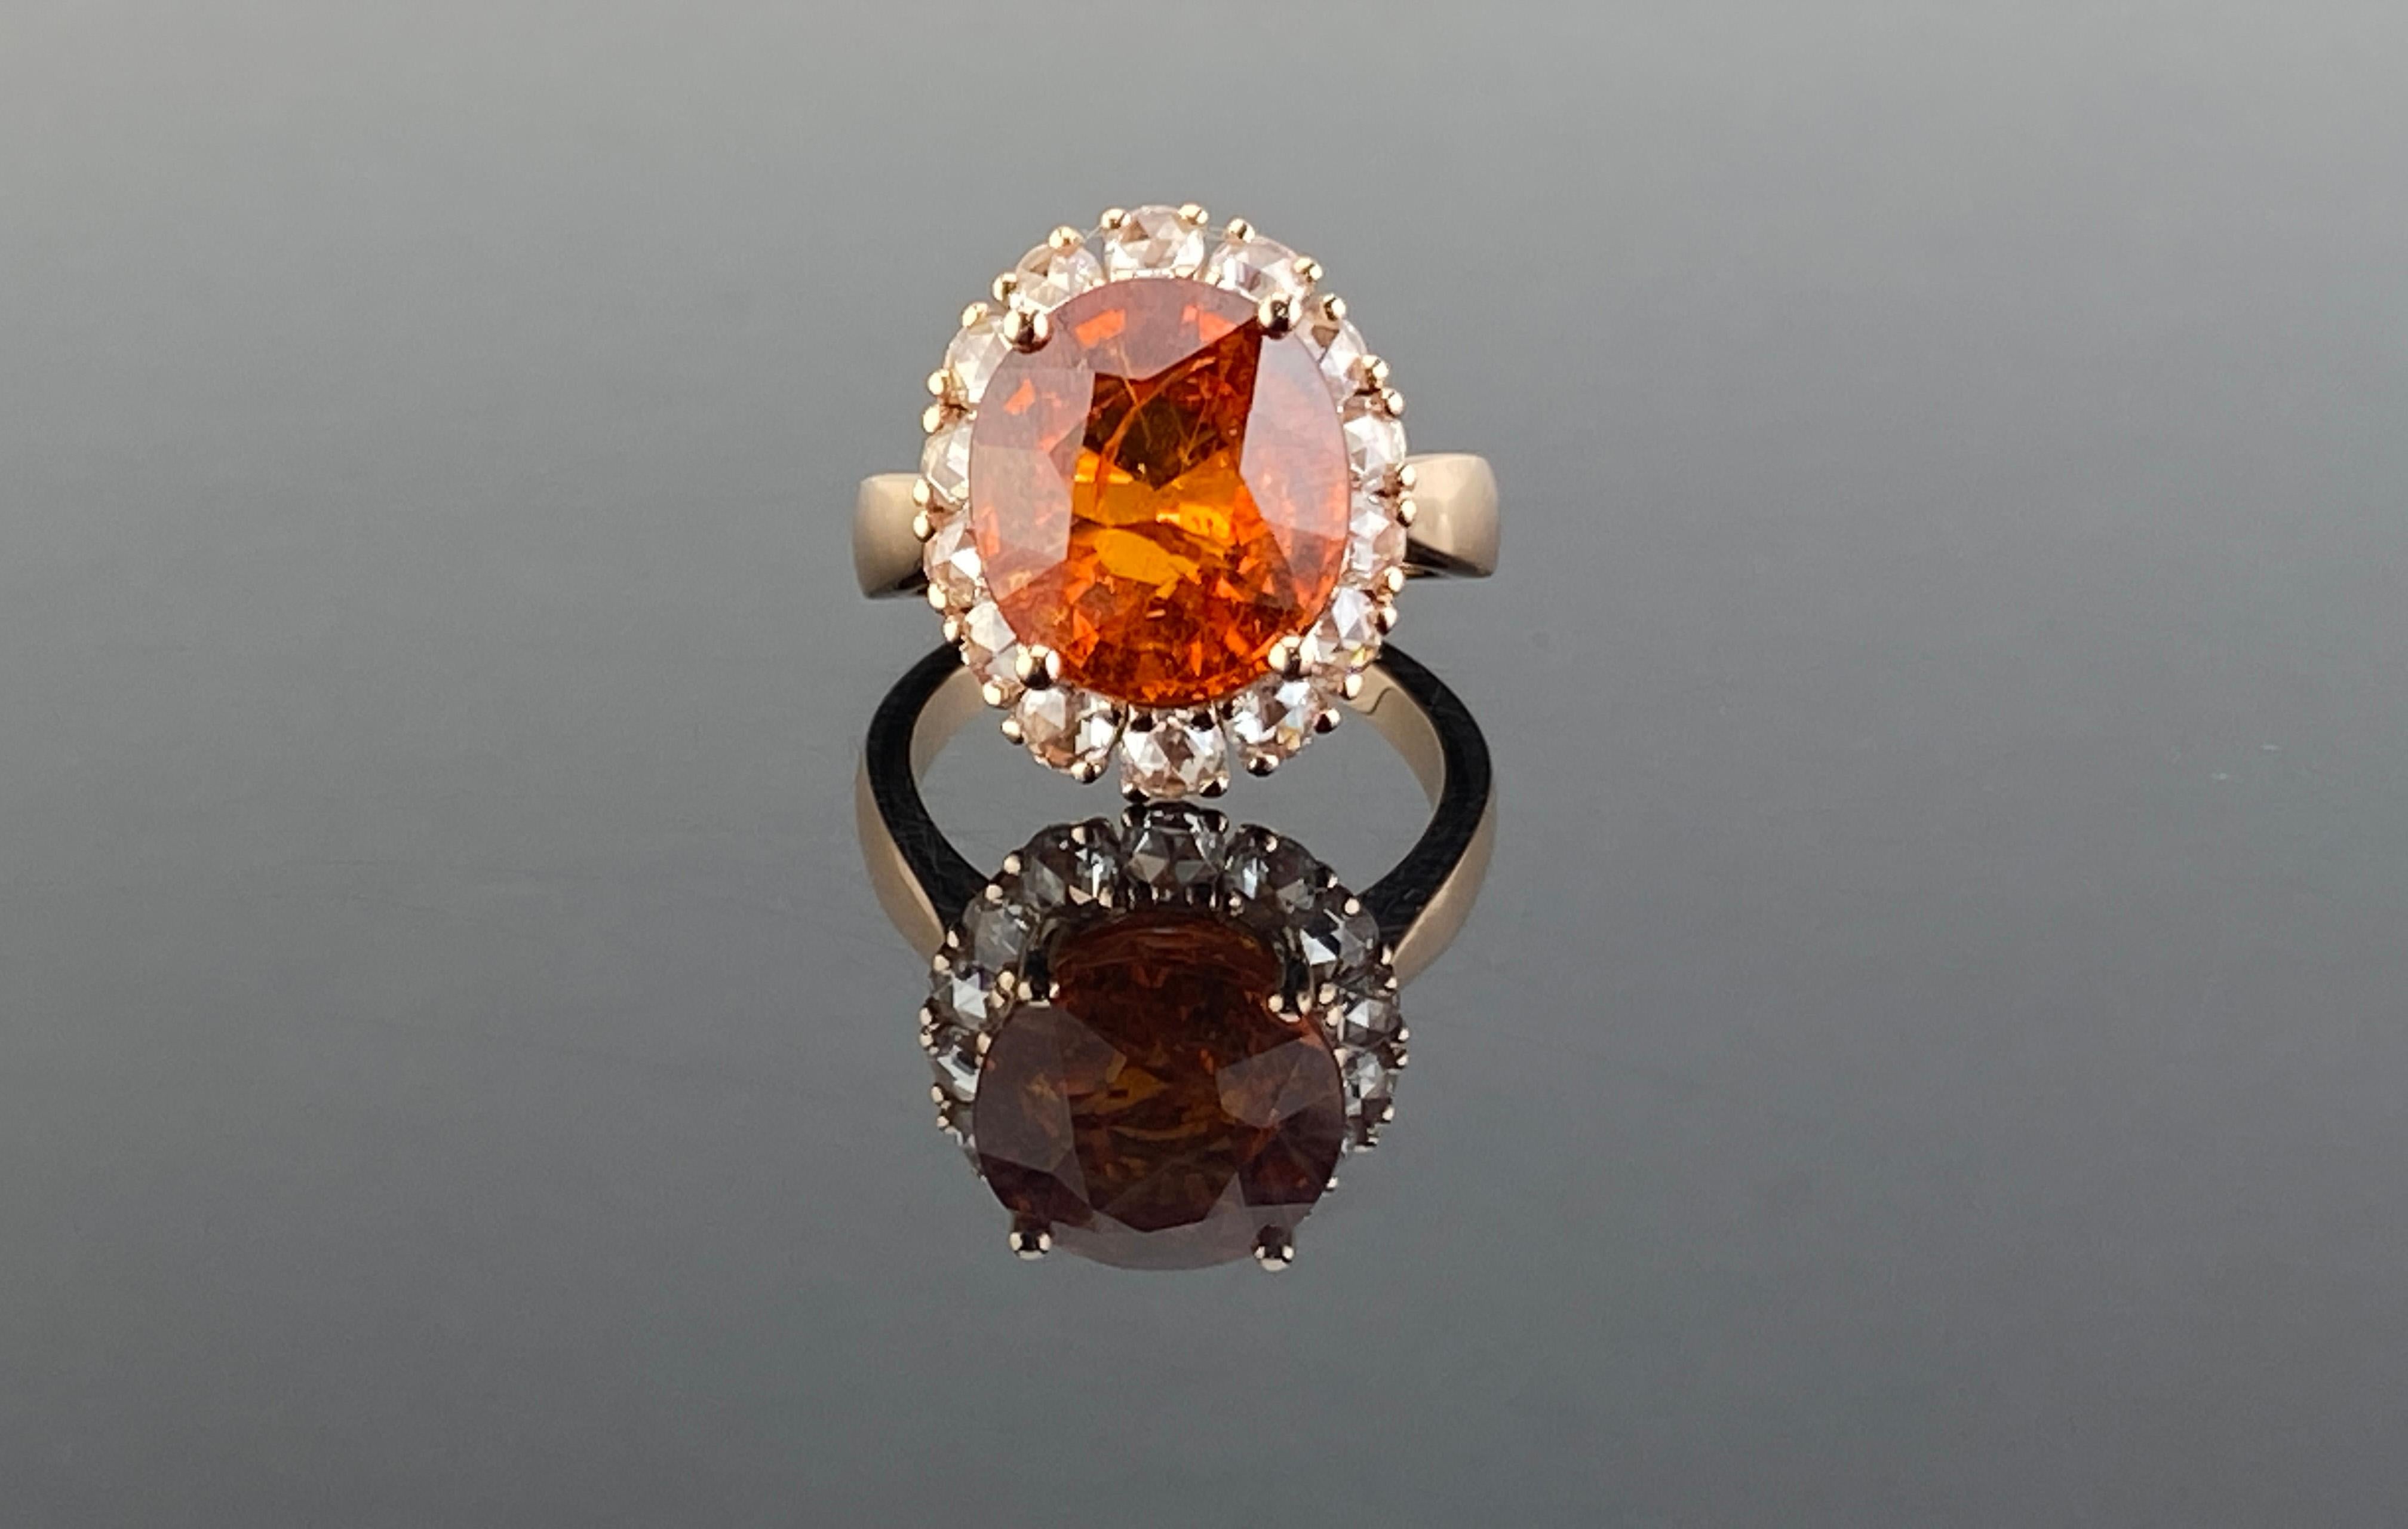 A lovely 18K pink gold ring featuring a fine spessartine garnet with a rich royal orange color giving it the trade name “mandarin.” It weighs 10.03 carats and has exceptional clarity for a mandarin garnet, which allows the stones natural bright